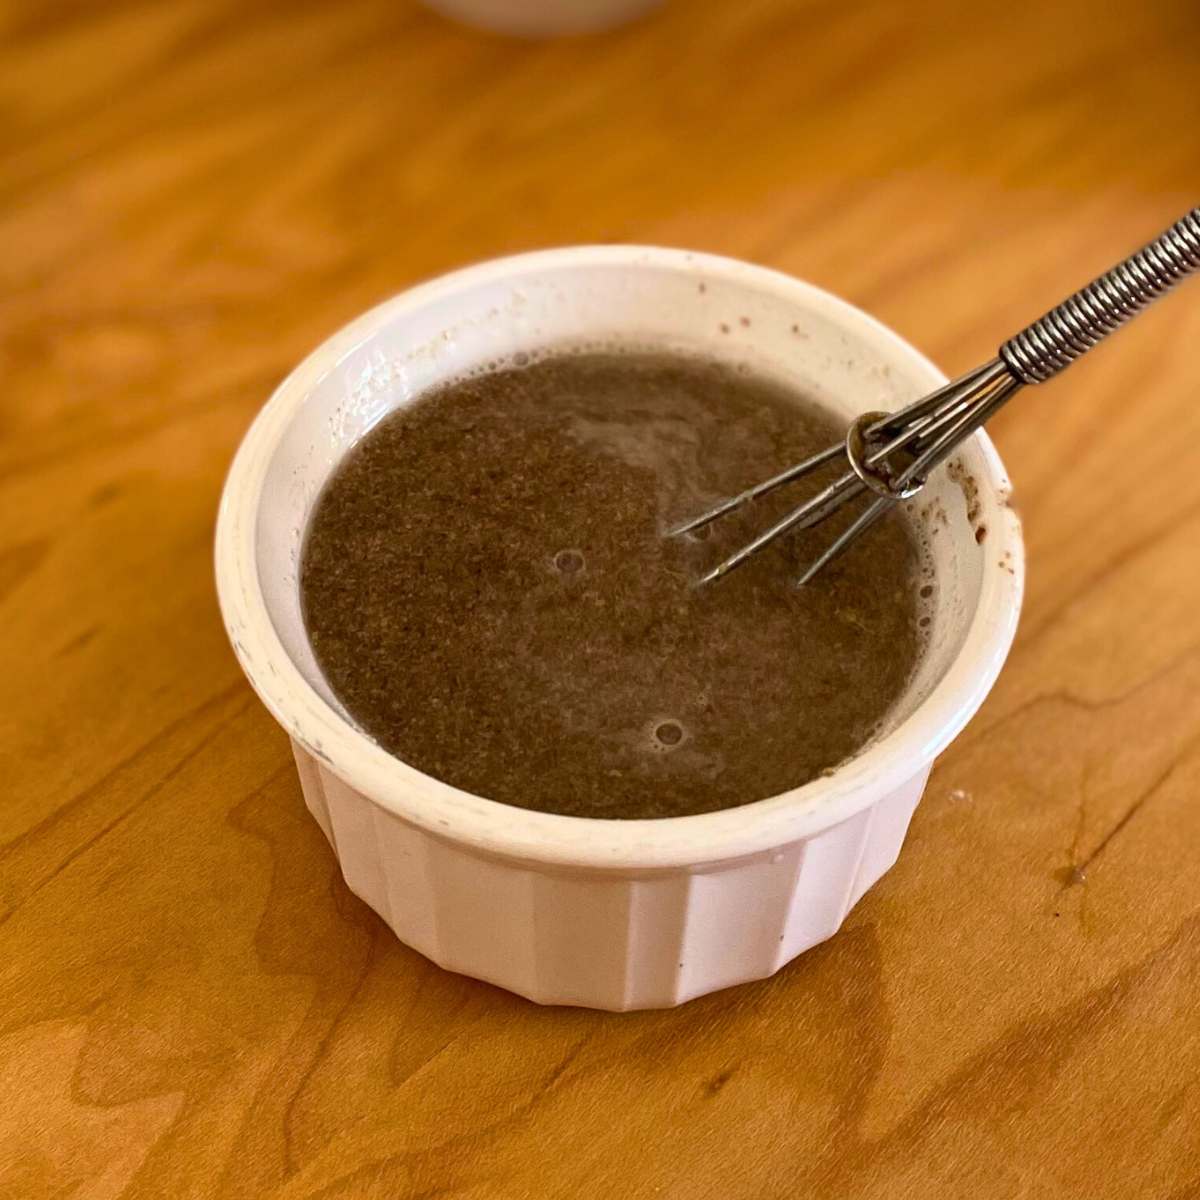 Ground flaxseed mixed with water in a small bowl.